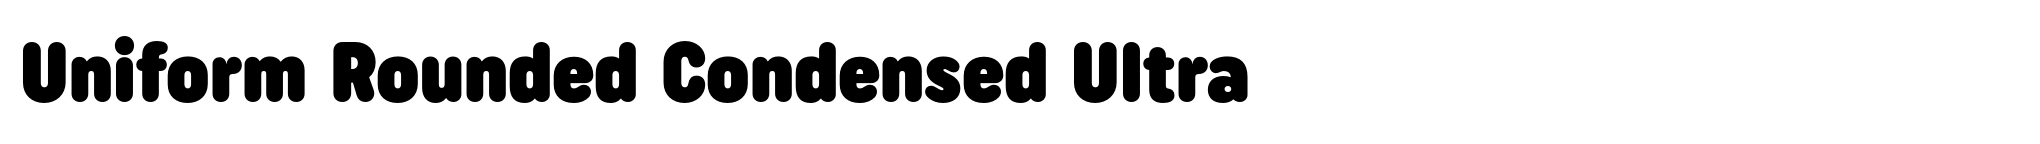 Uniform Rounded Condensed Ultra image